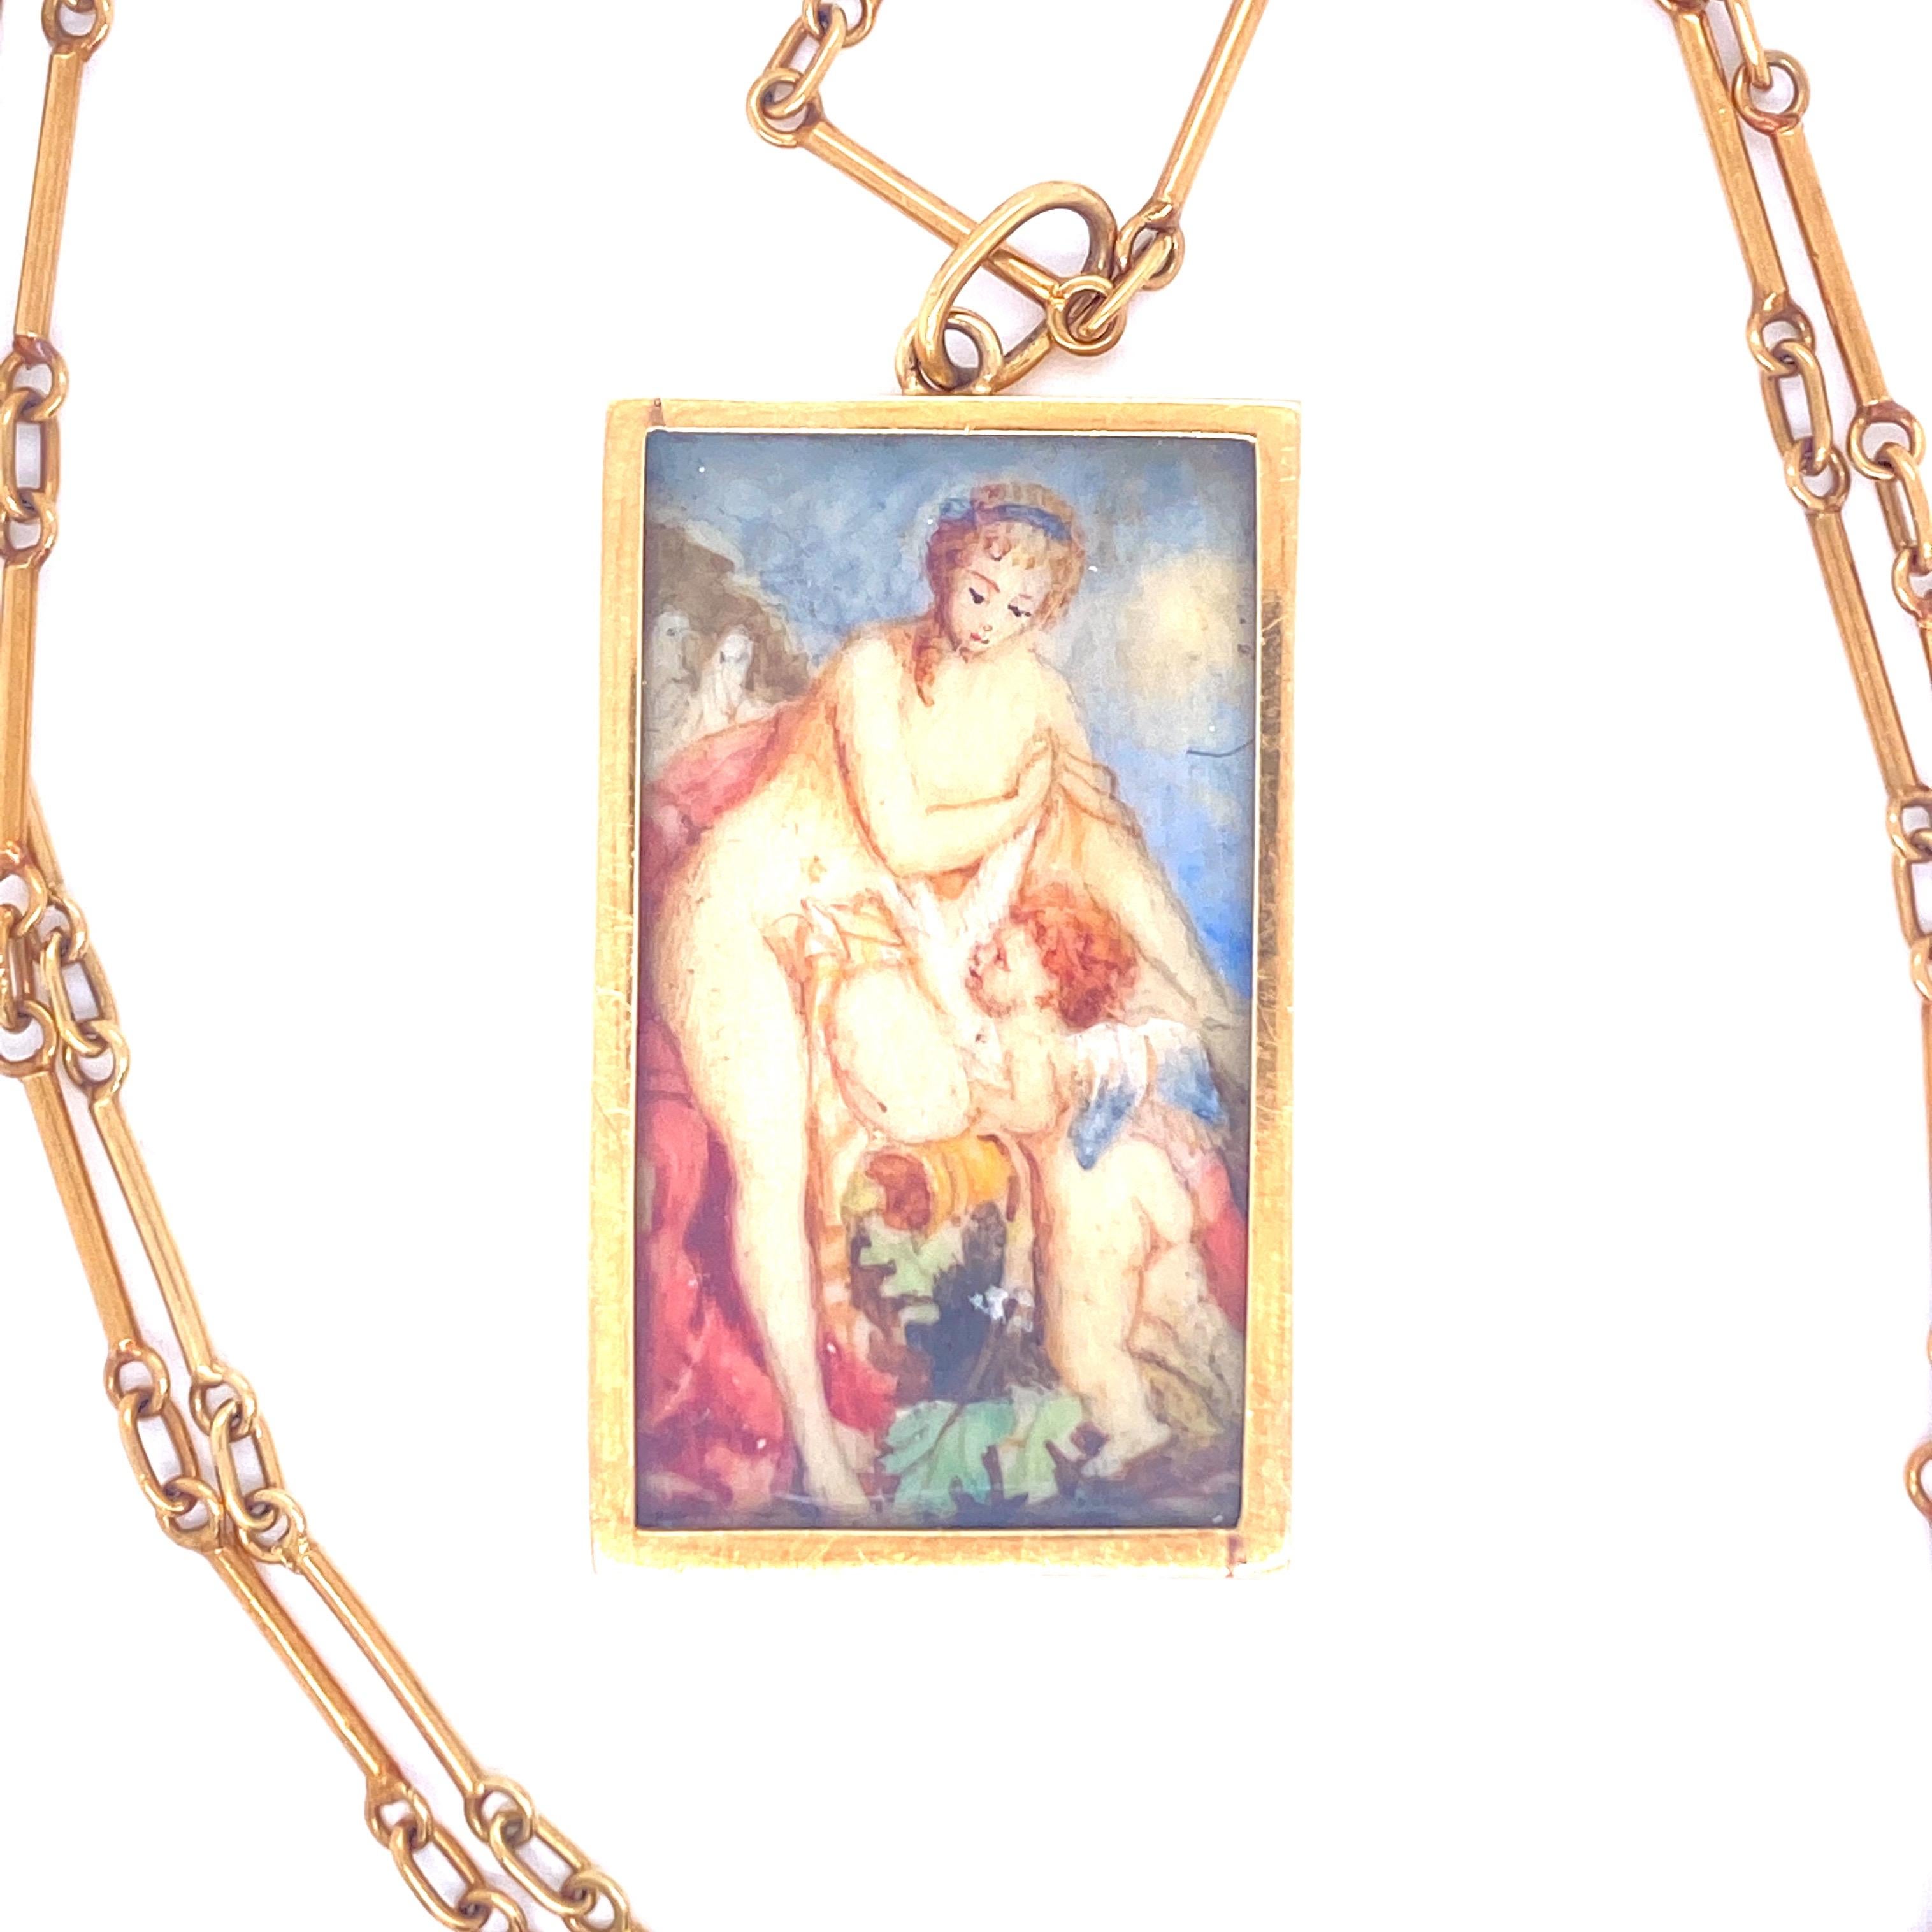 Unique authentic necklace from 1800 made of solid 18k gold.
The pendant showcase a portraits depicting a woman with a child.
Excellent condition

MEASURES: The Necklace is 33 cm (12,99 in) long
WEIGHT: 17,50 grams 

* the jewel comes with appraisal